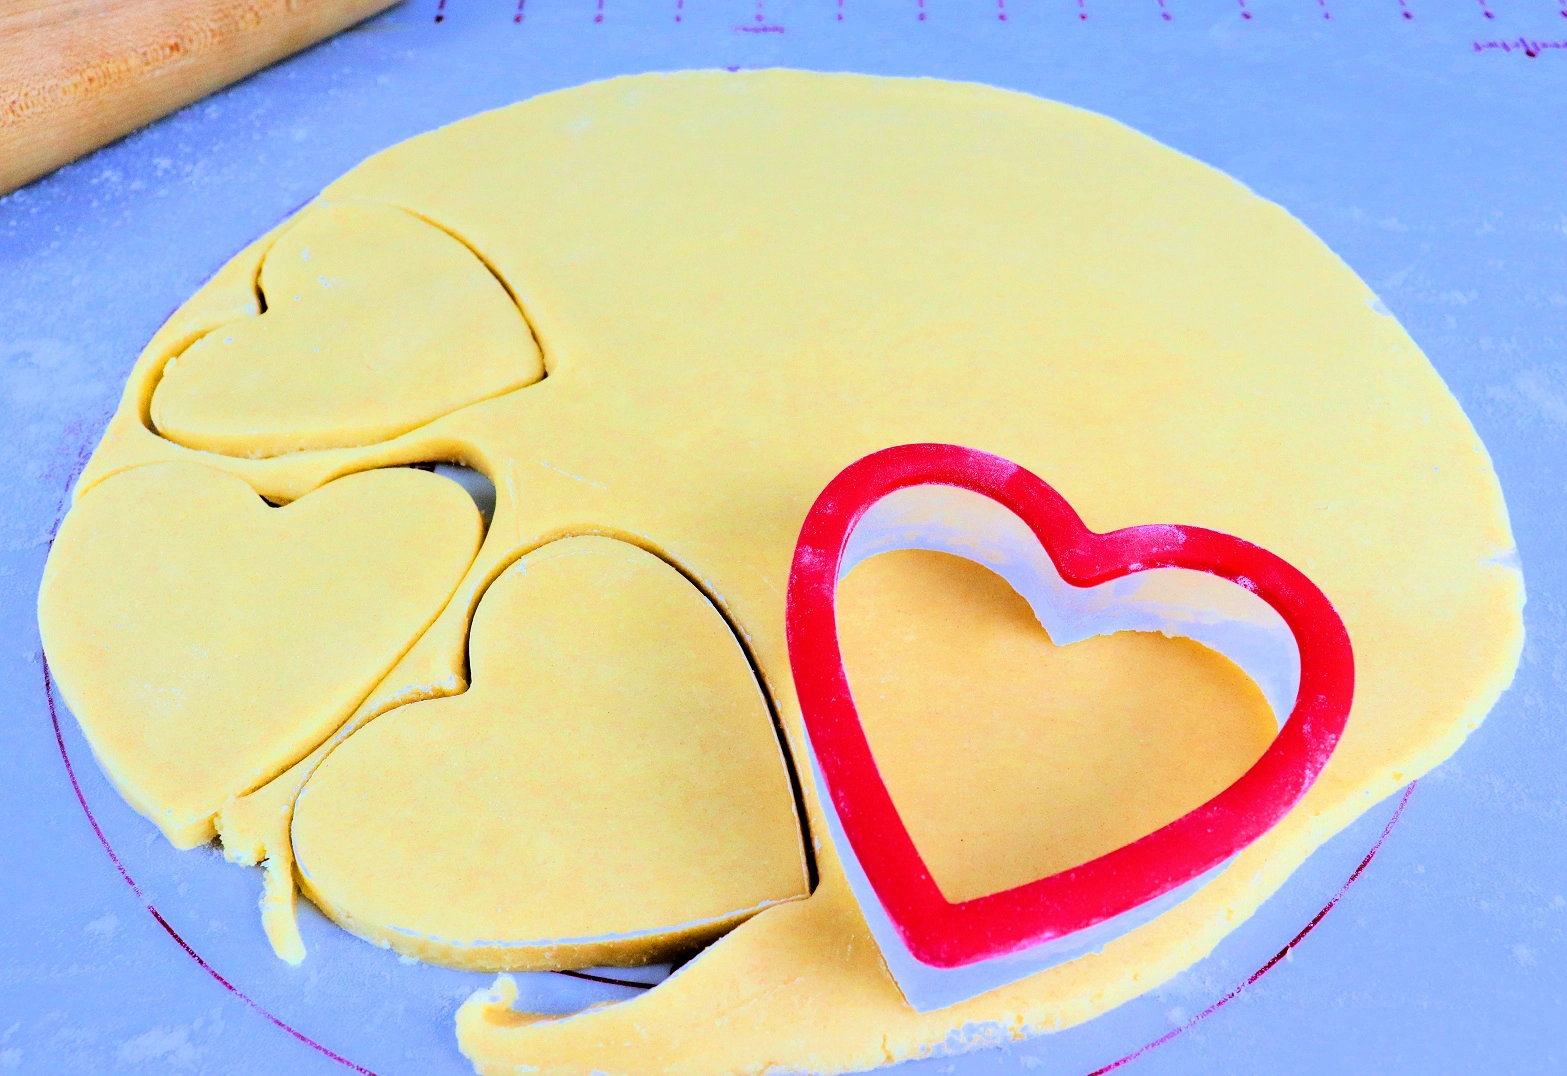 Cutting out Heart-shapes for Valentine's day cookies